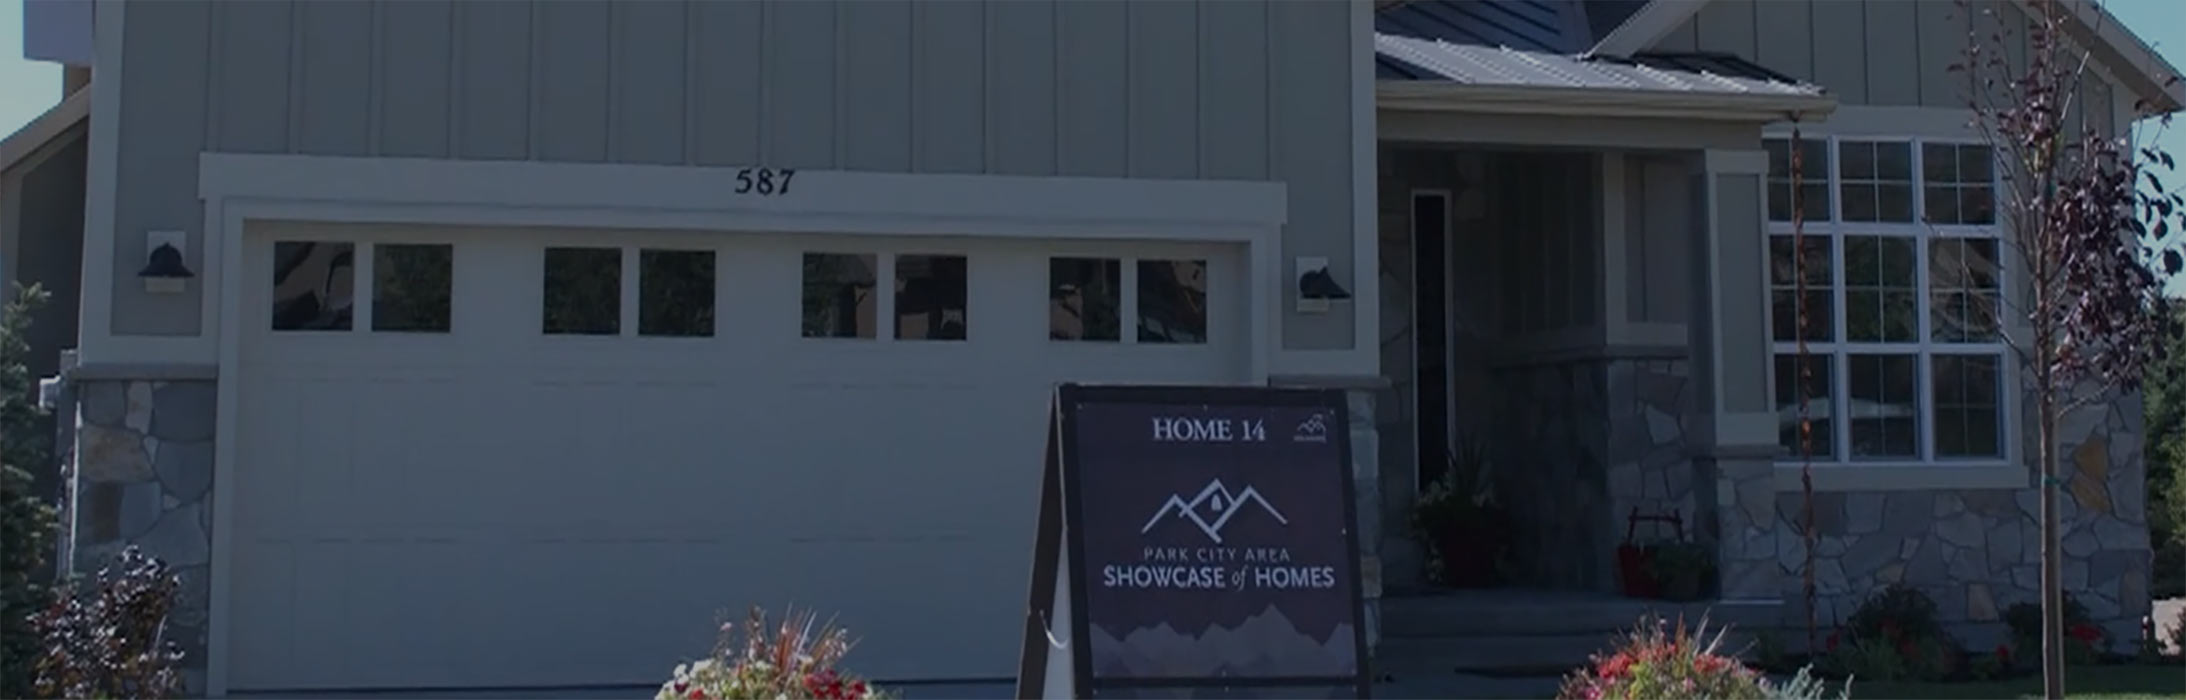 <strong>Regal Homes</strong> <br />Home 14